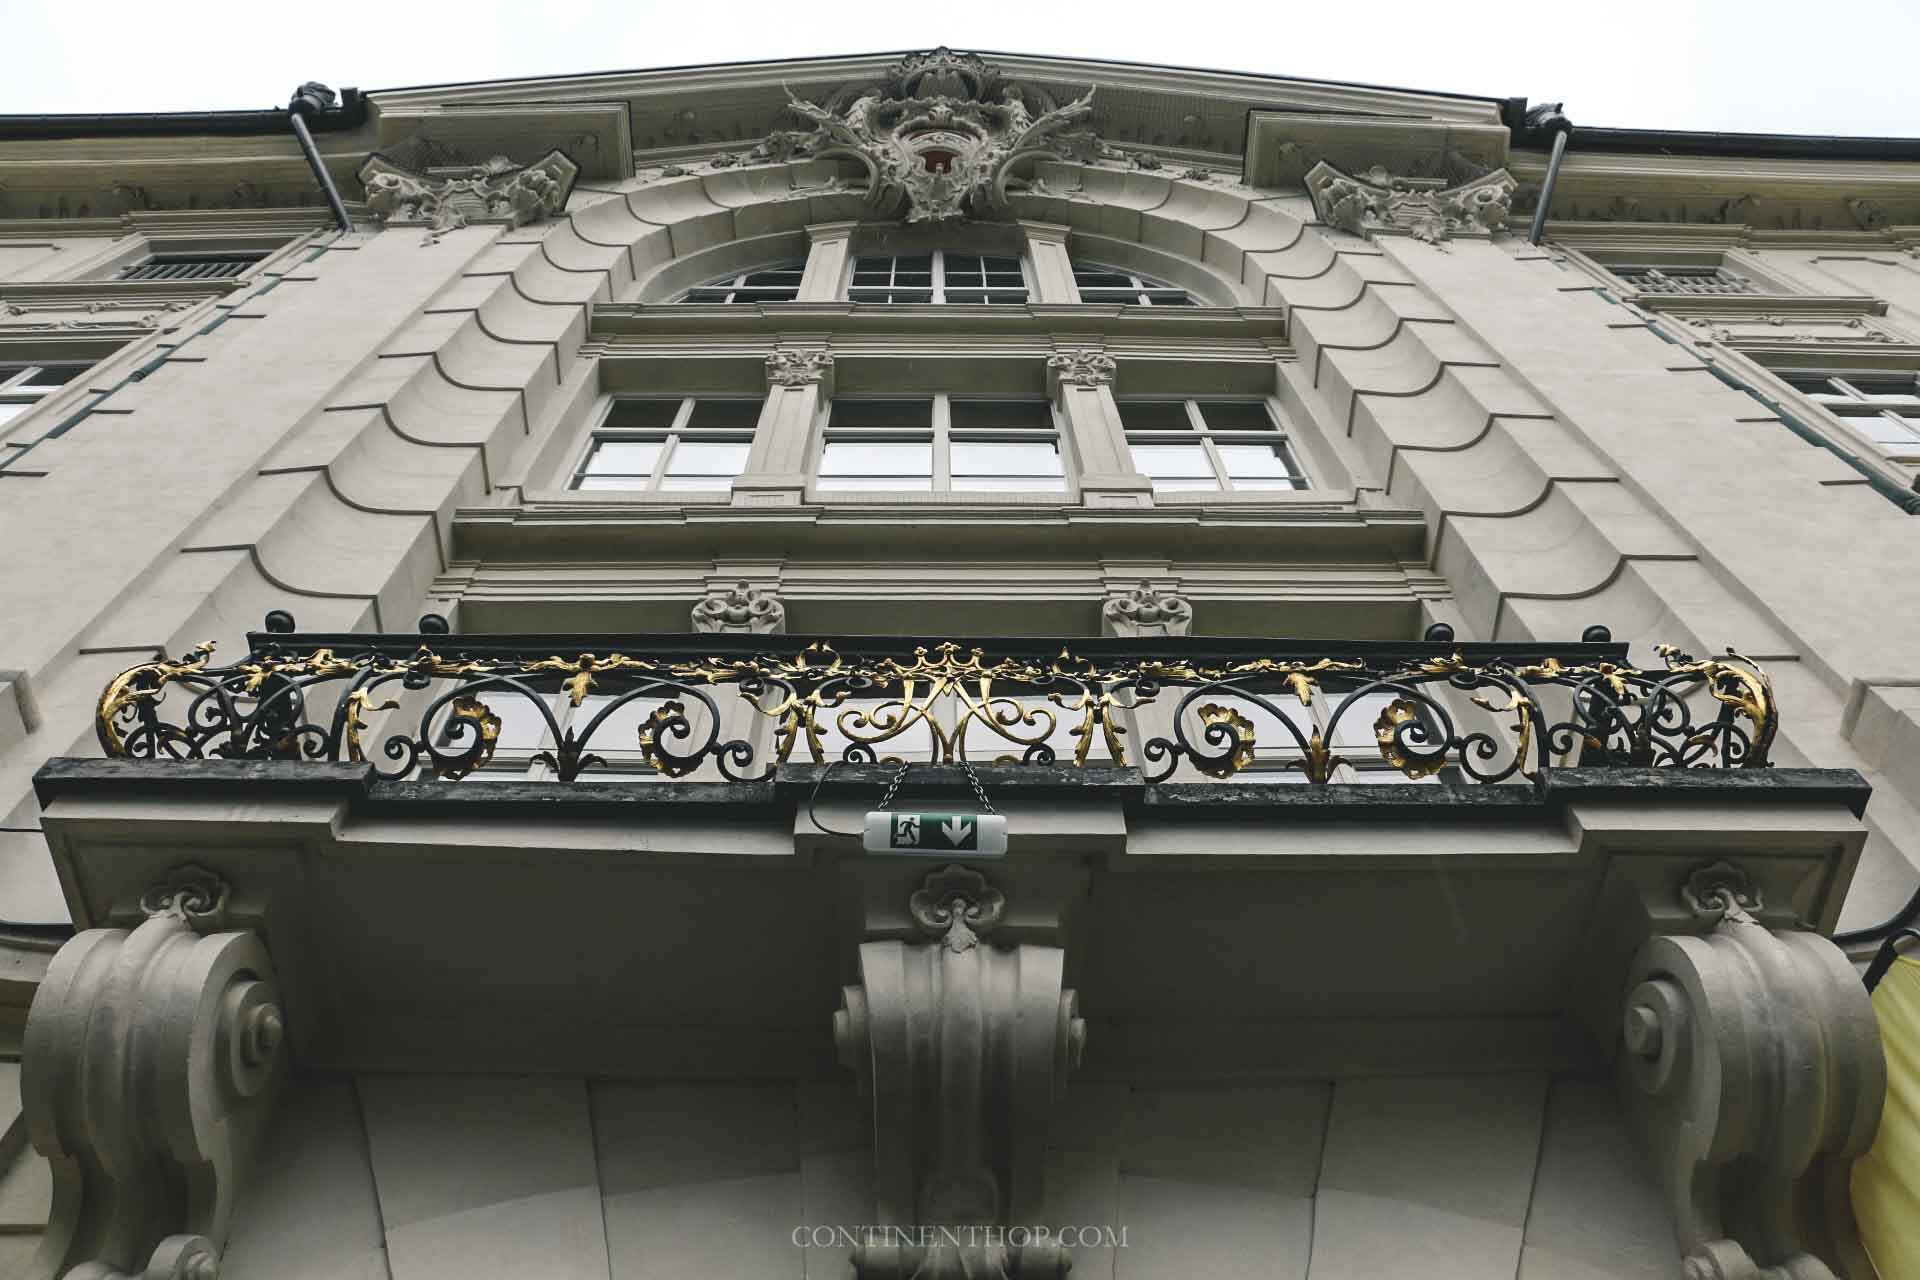 Things to do and see in Innsbruck - The facade of the hofburg palace